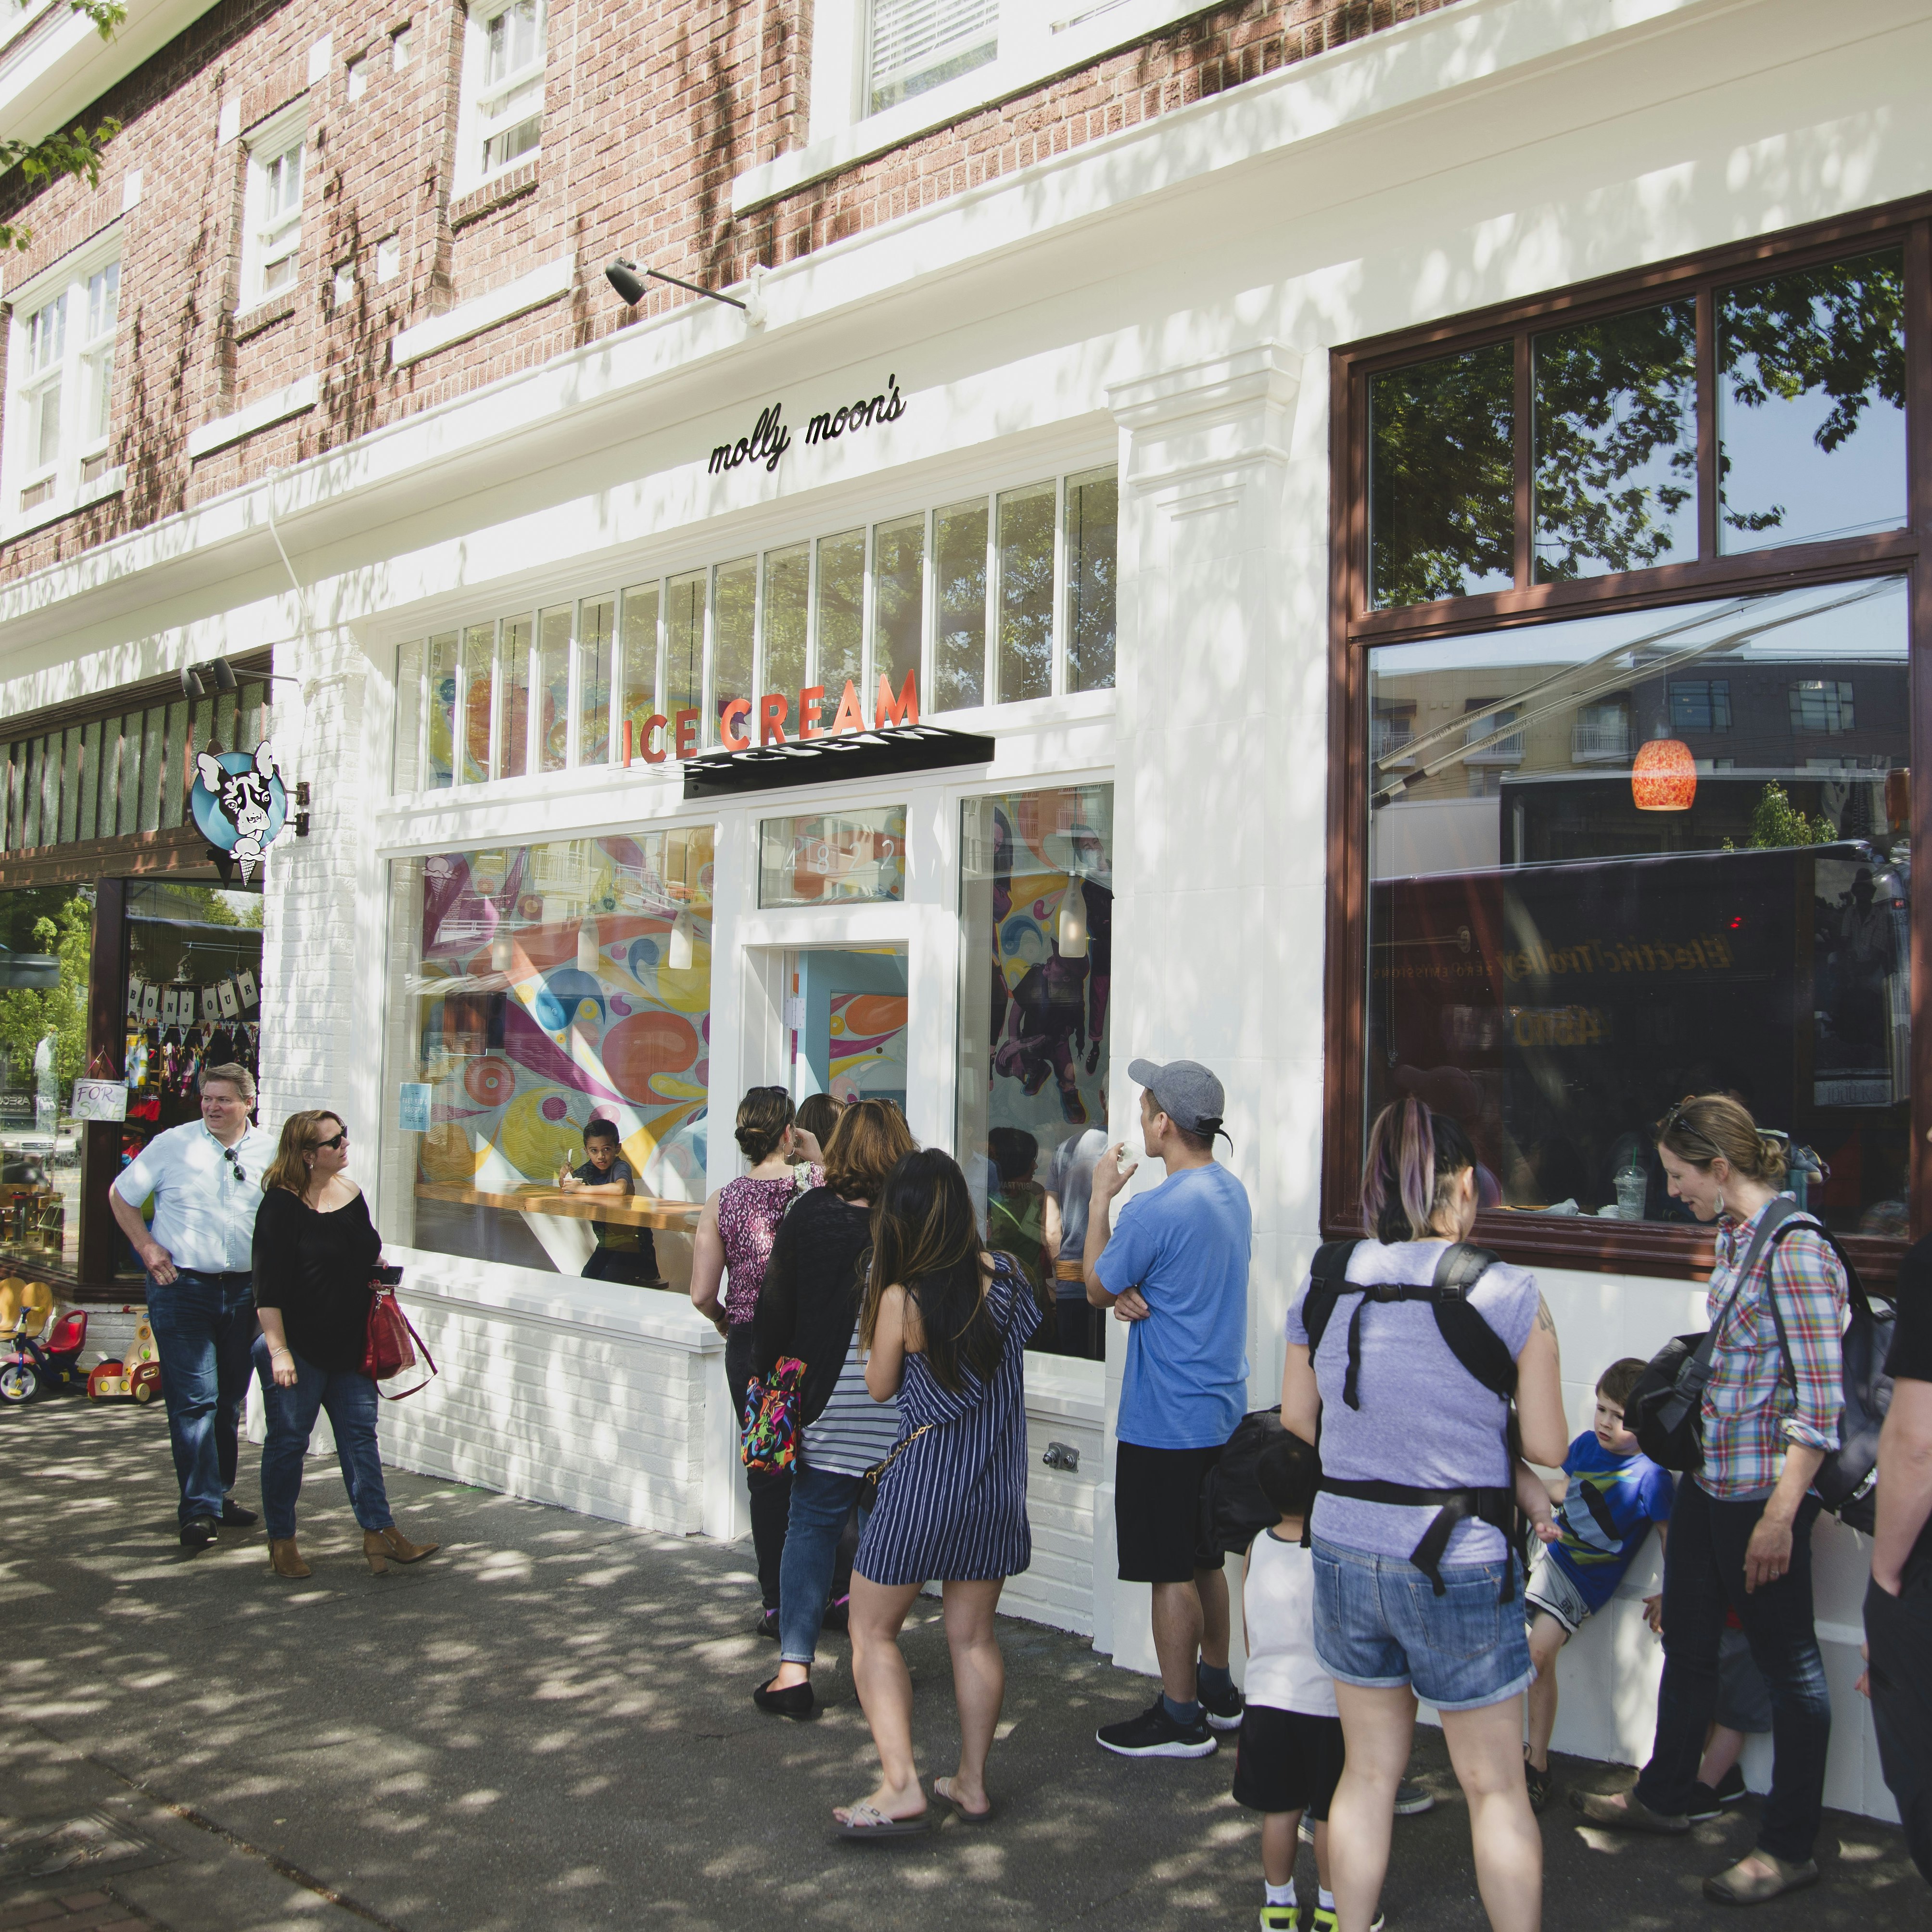 A group of people line up in front of Molly Moon's ice cream shop in Seattle